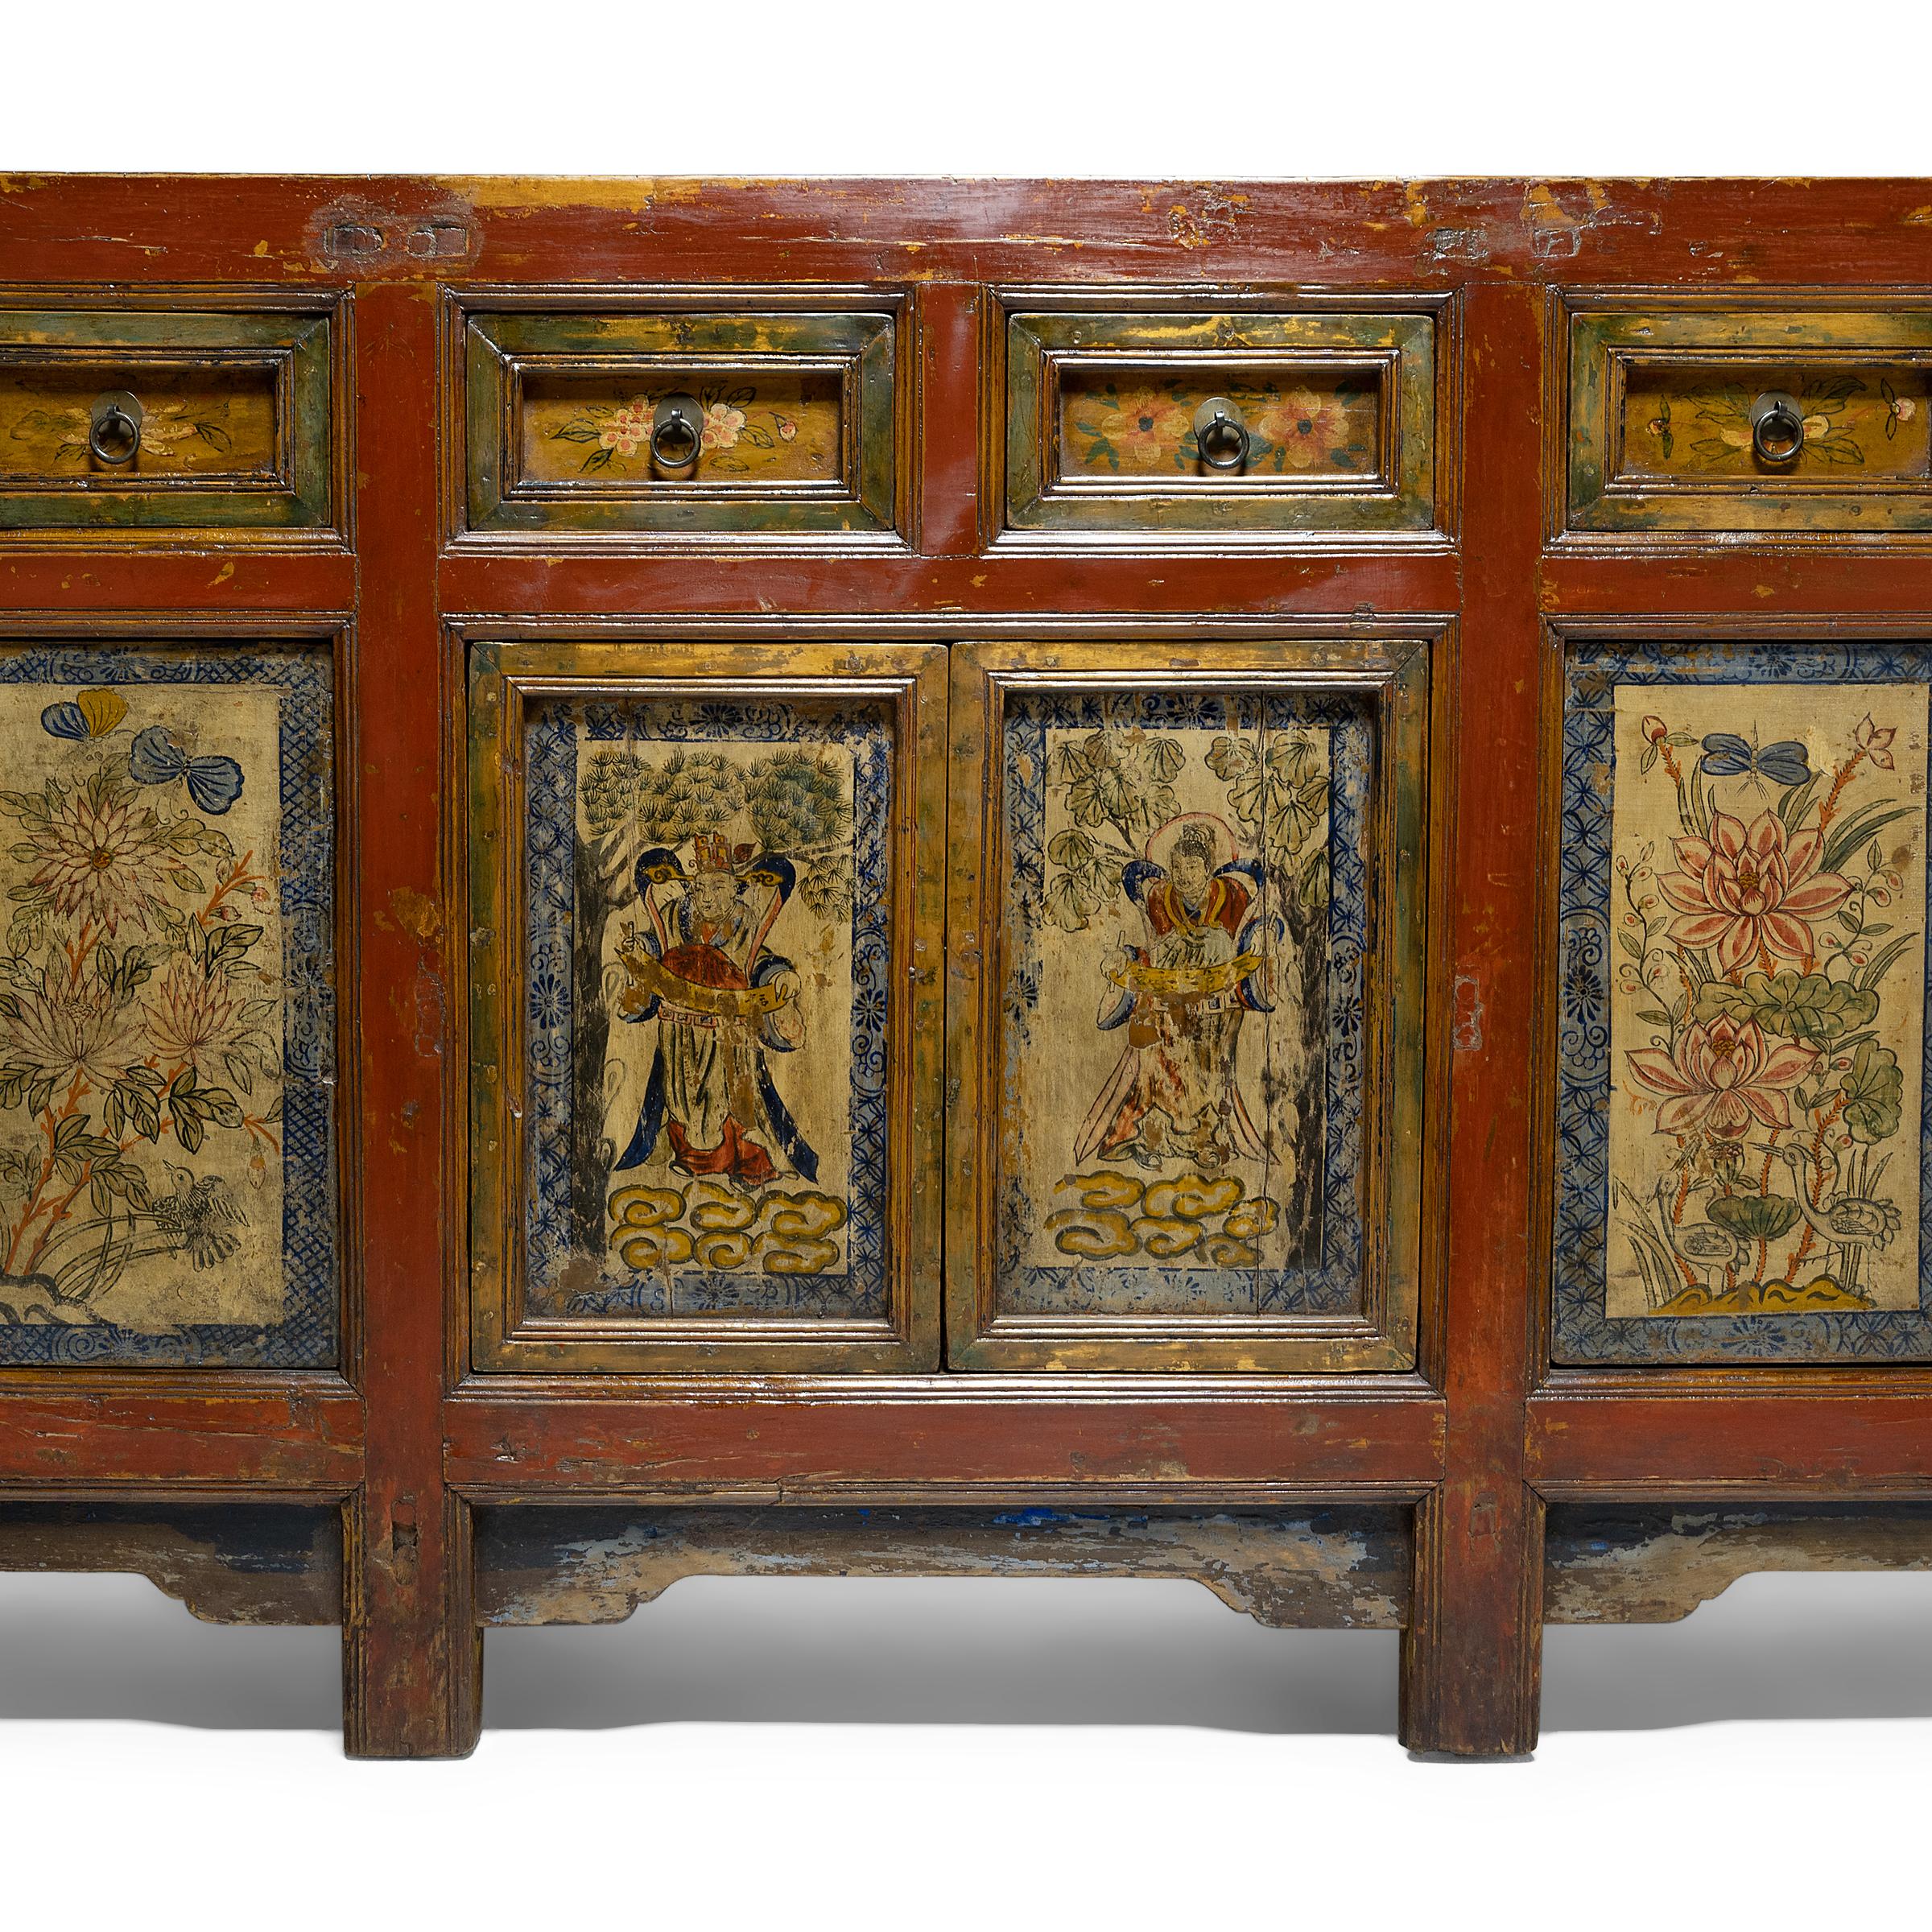 20th Century Chinese Provincial Four Seasons Coffer, c. 1900